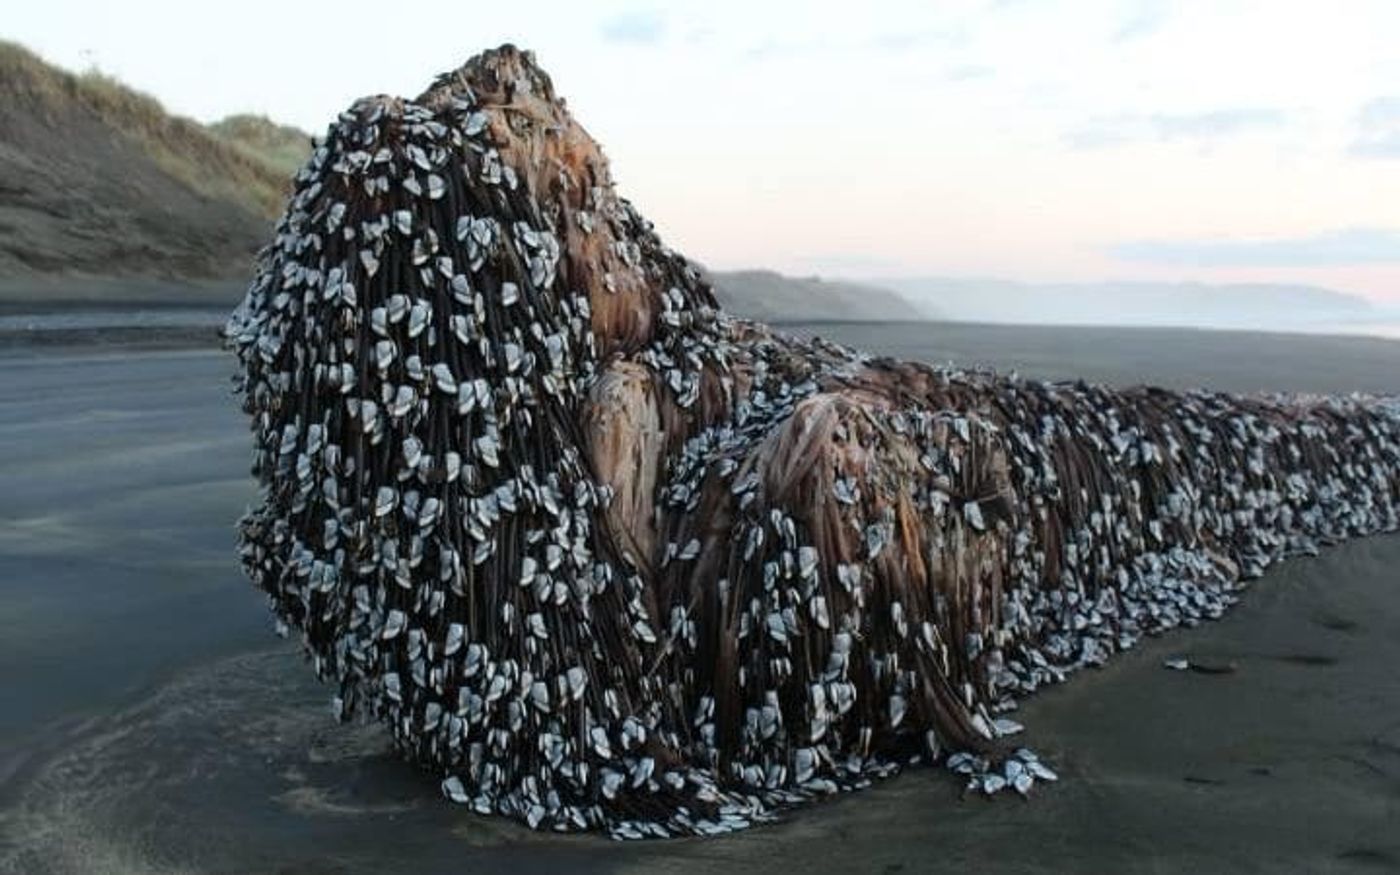 This strange object washed up on a beach in New Zealand earlier this month.